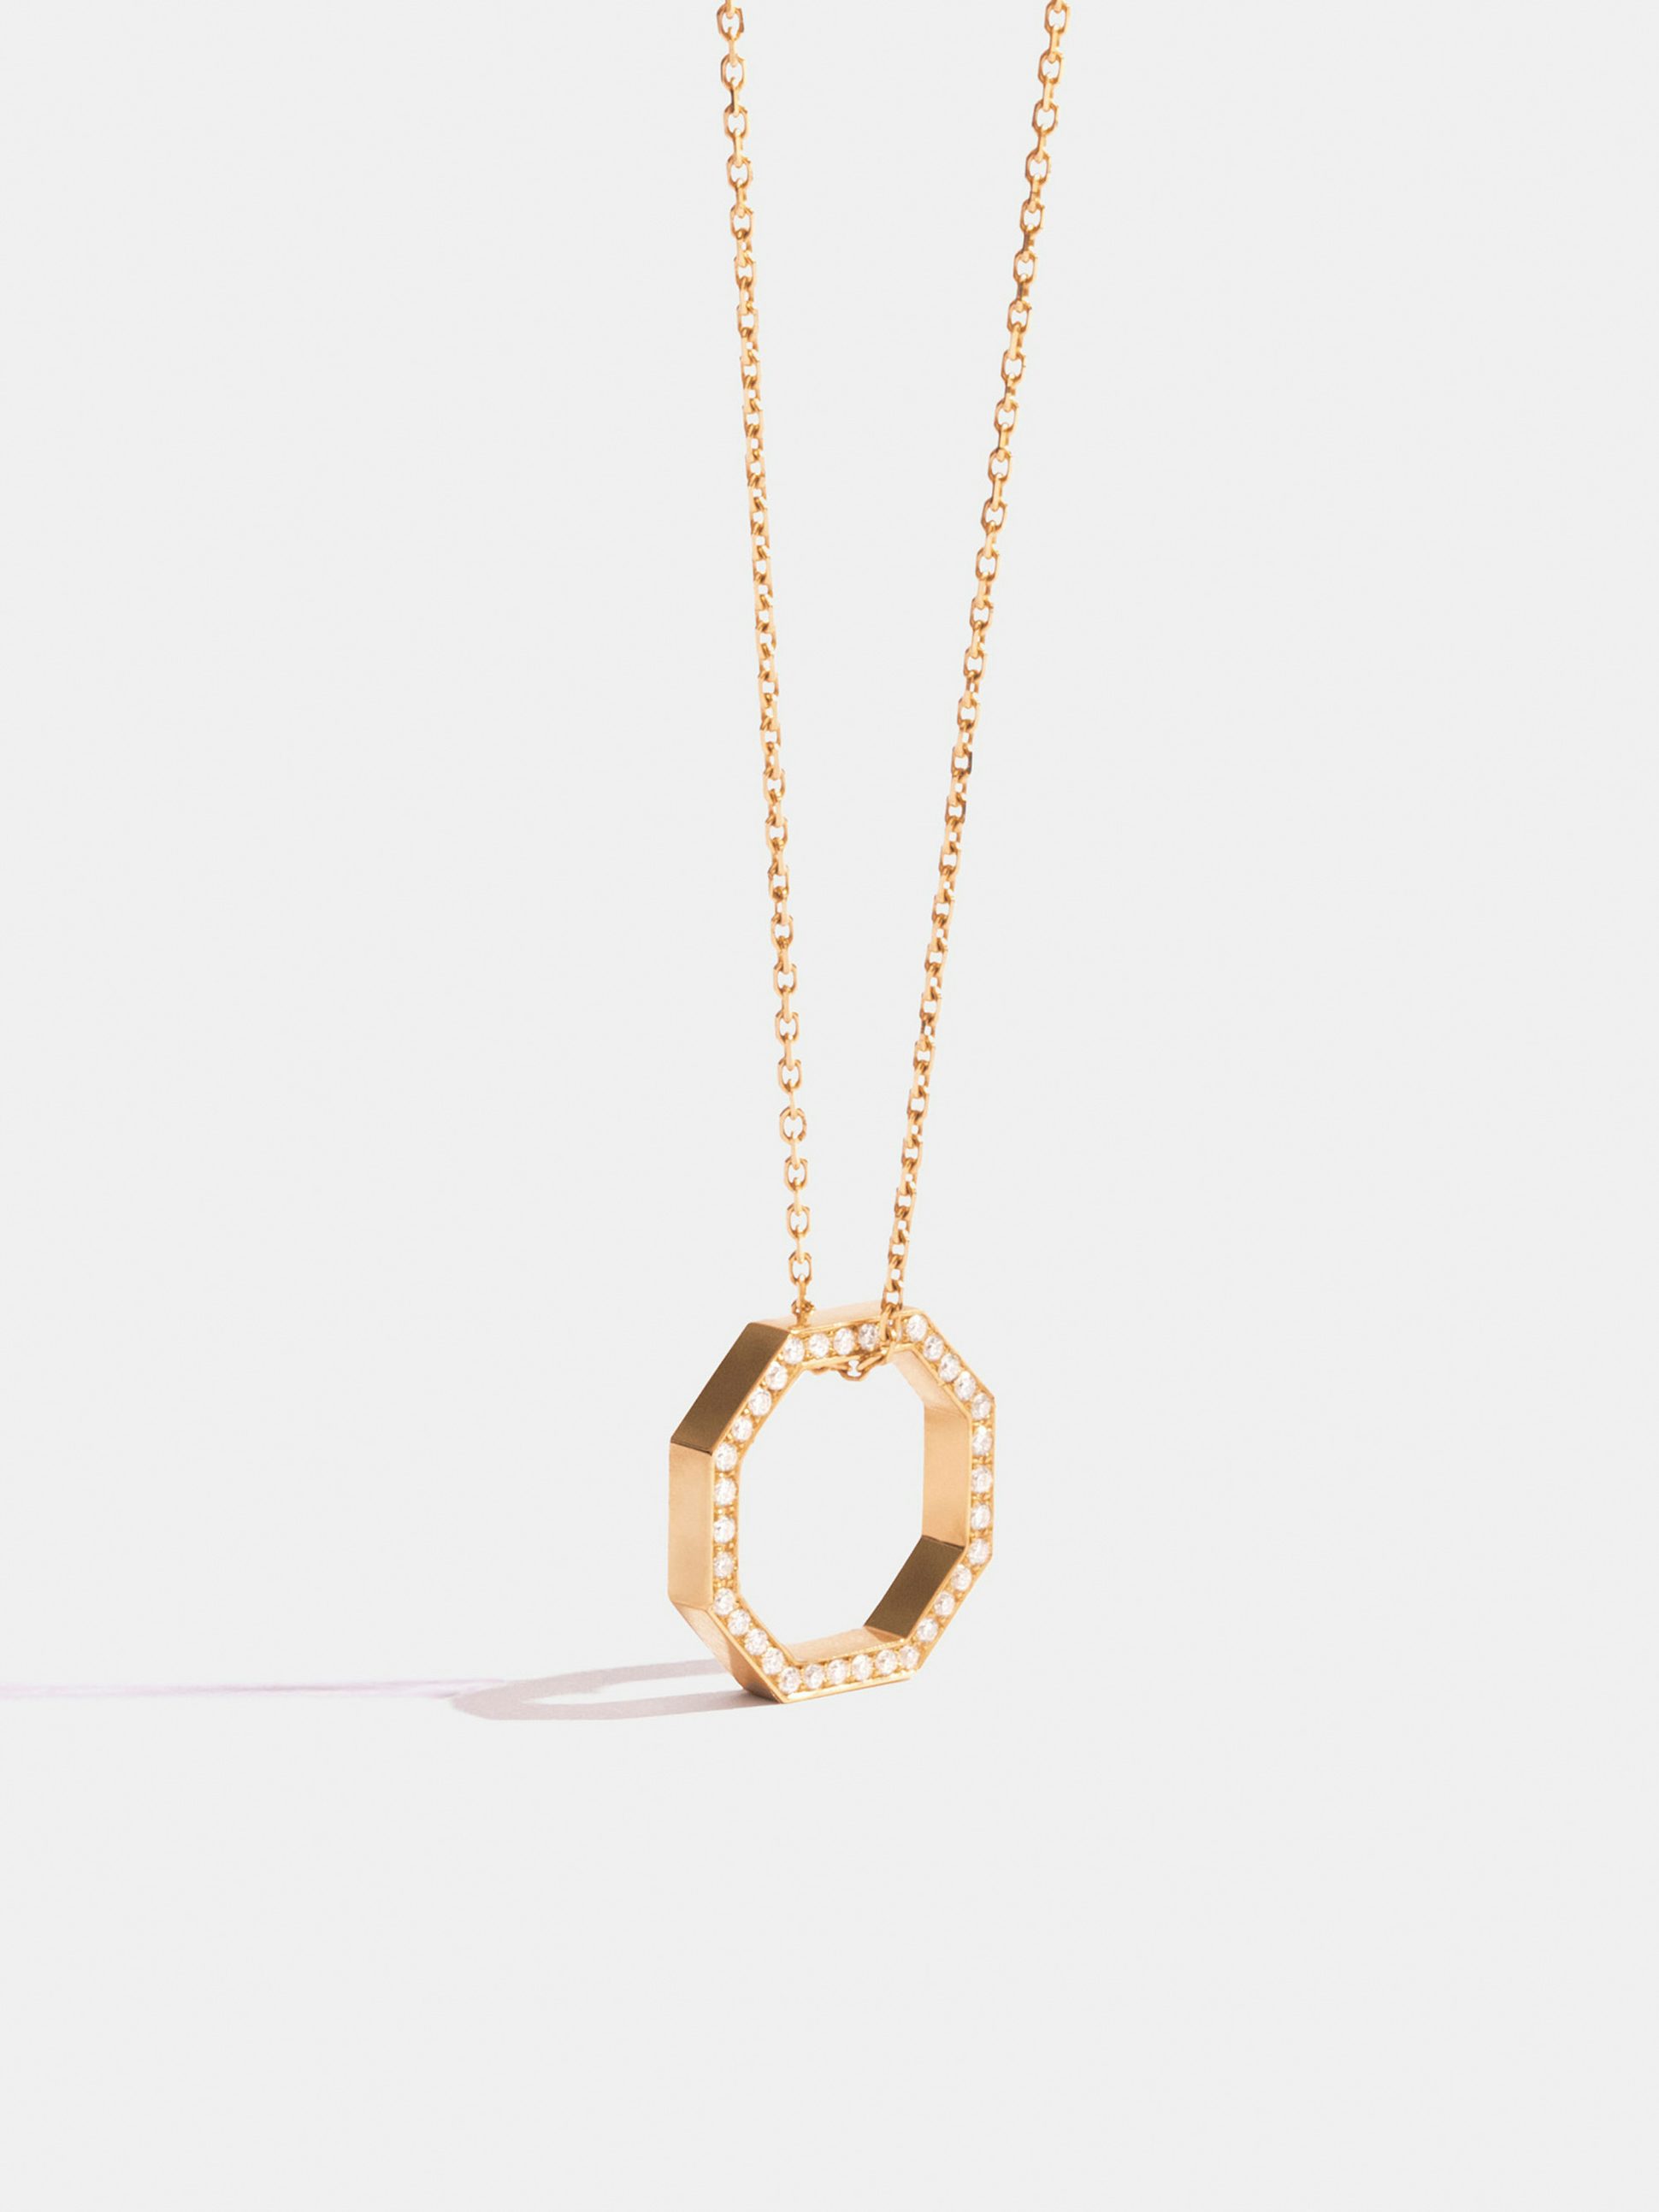 Octogone 14mm pendant in 18k Fairmined ethical yellow gold, paved with lab-grown diamonds, on a chain.